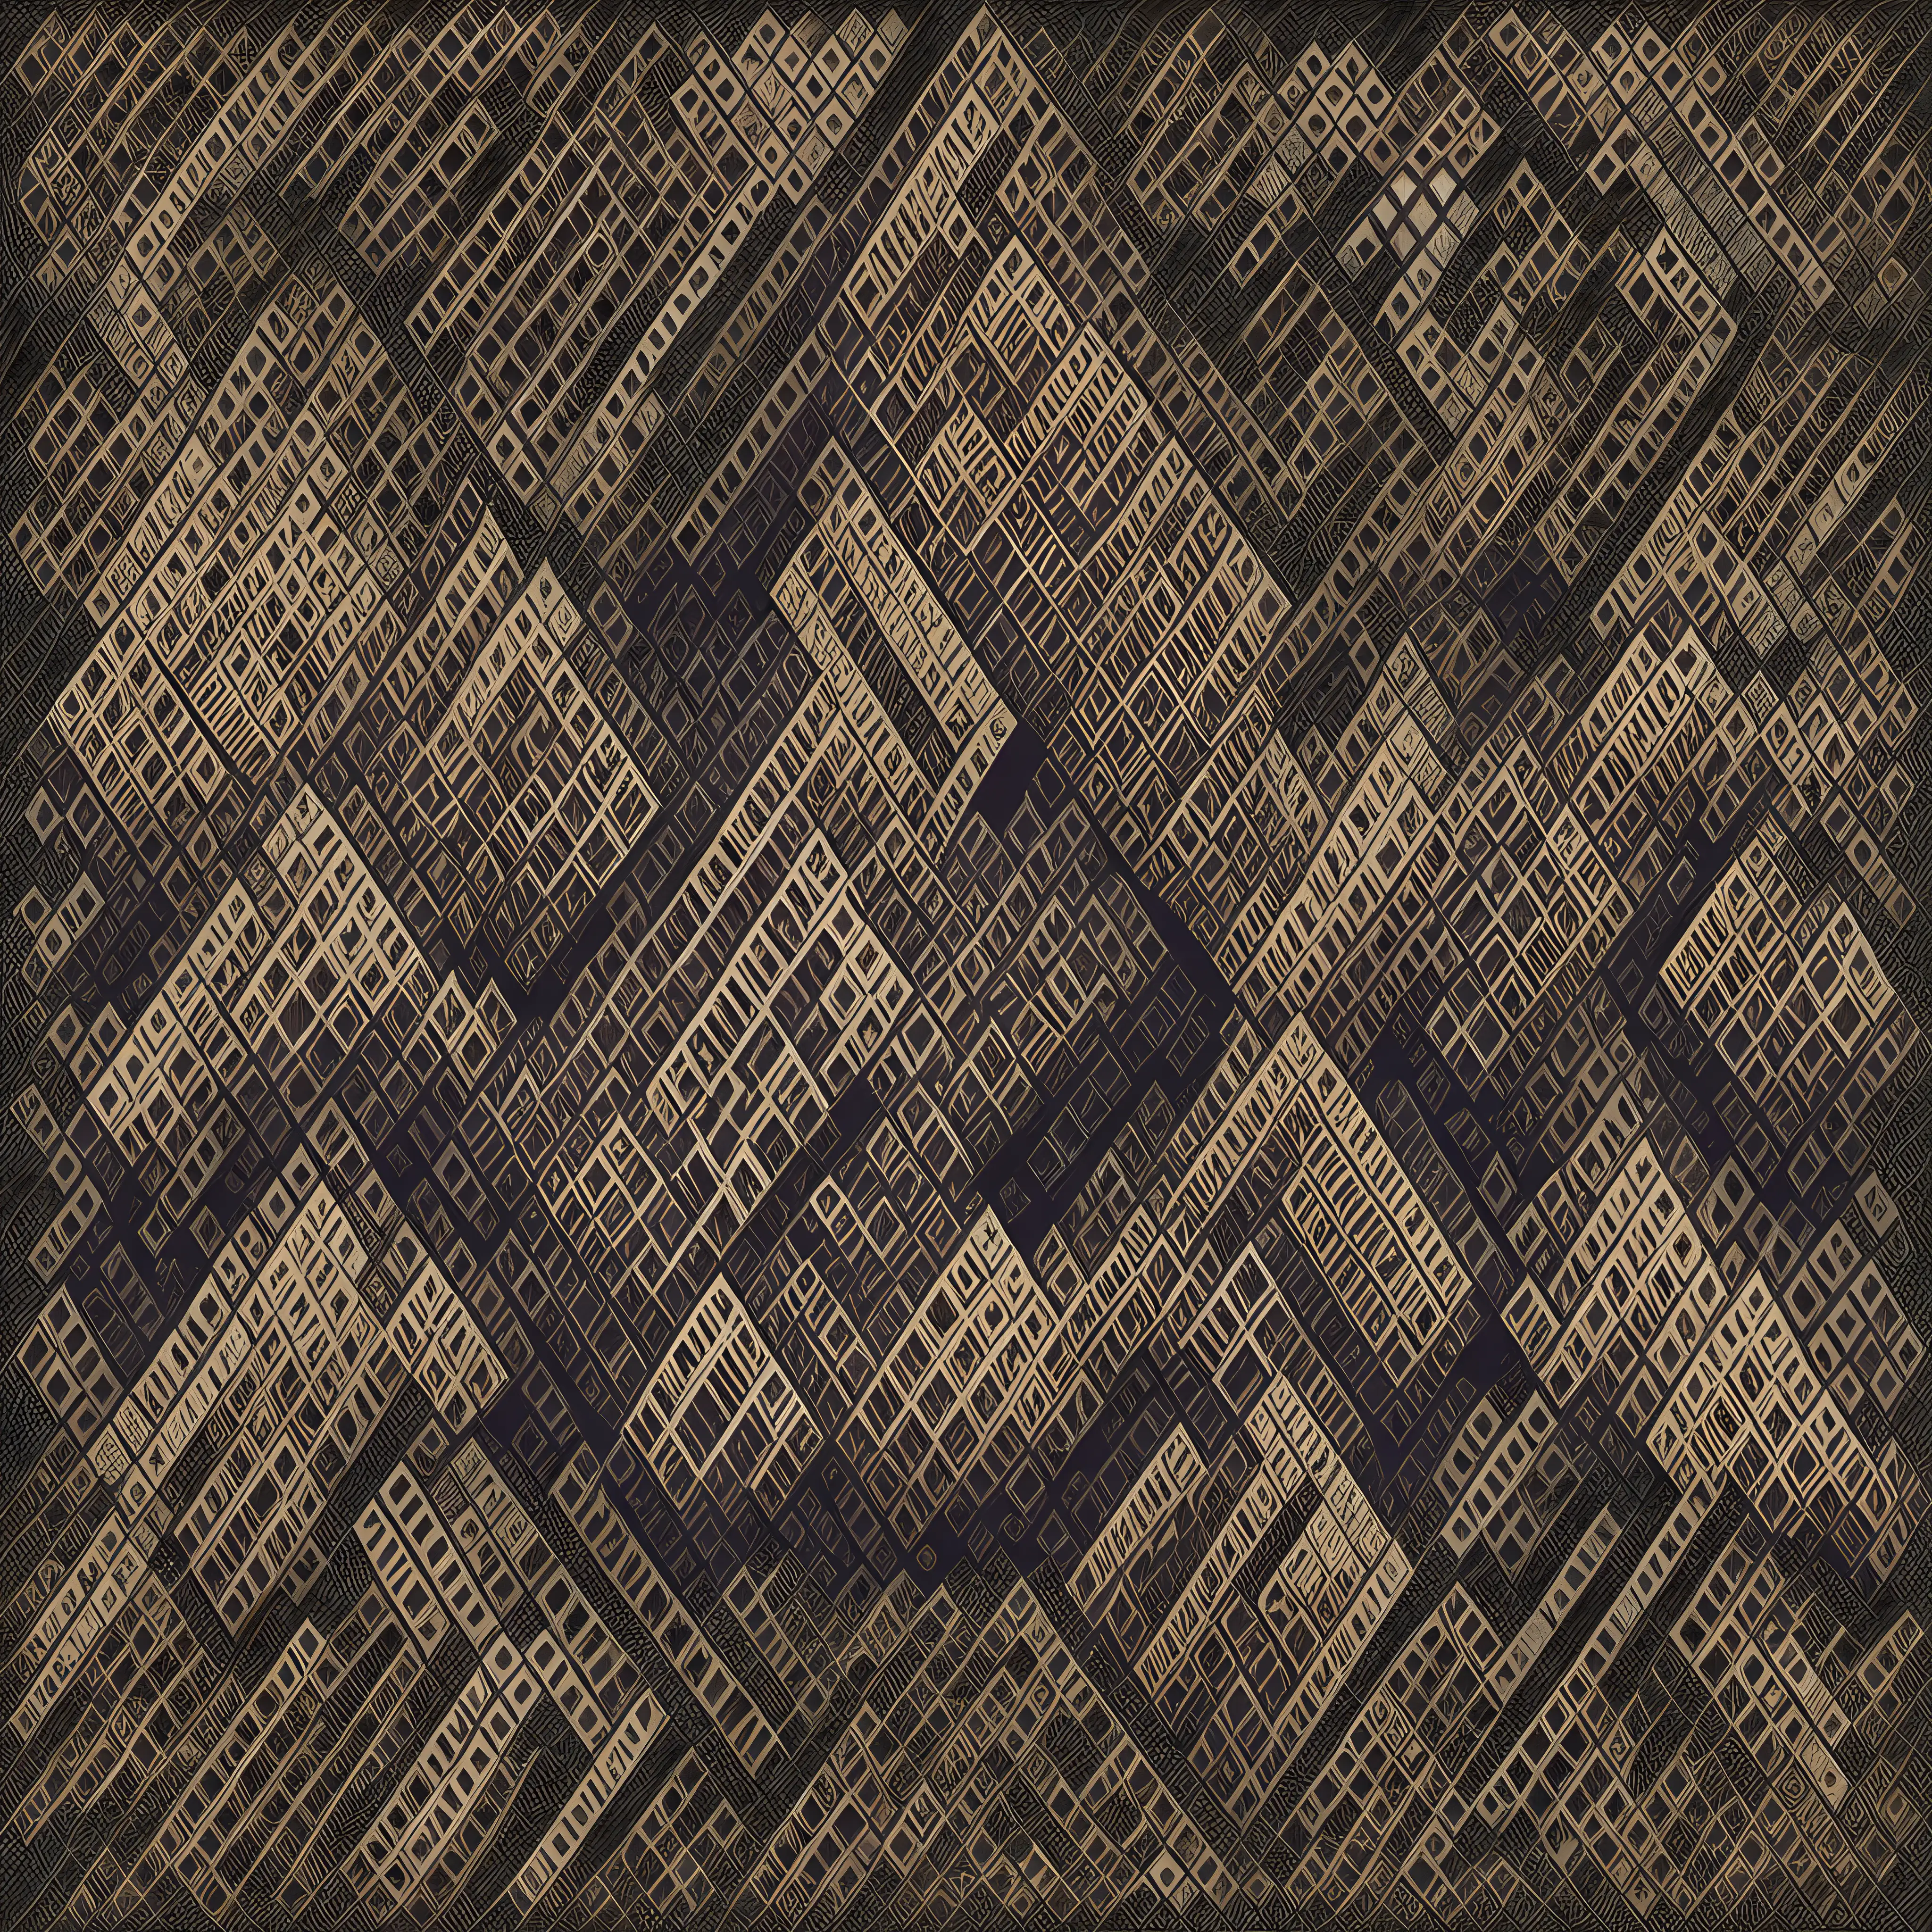 Abstract Cellular Automata Patterns in Muted Colors